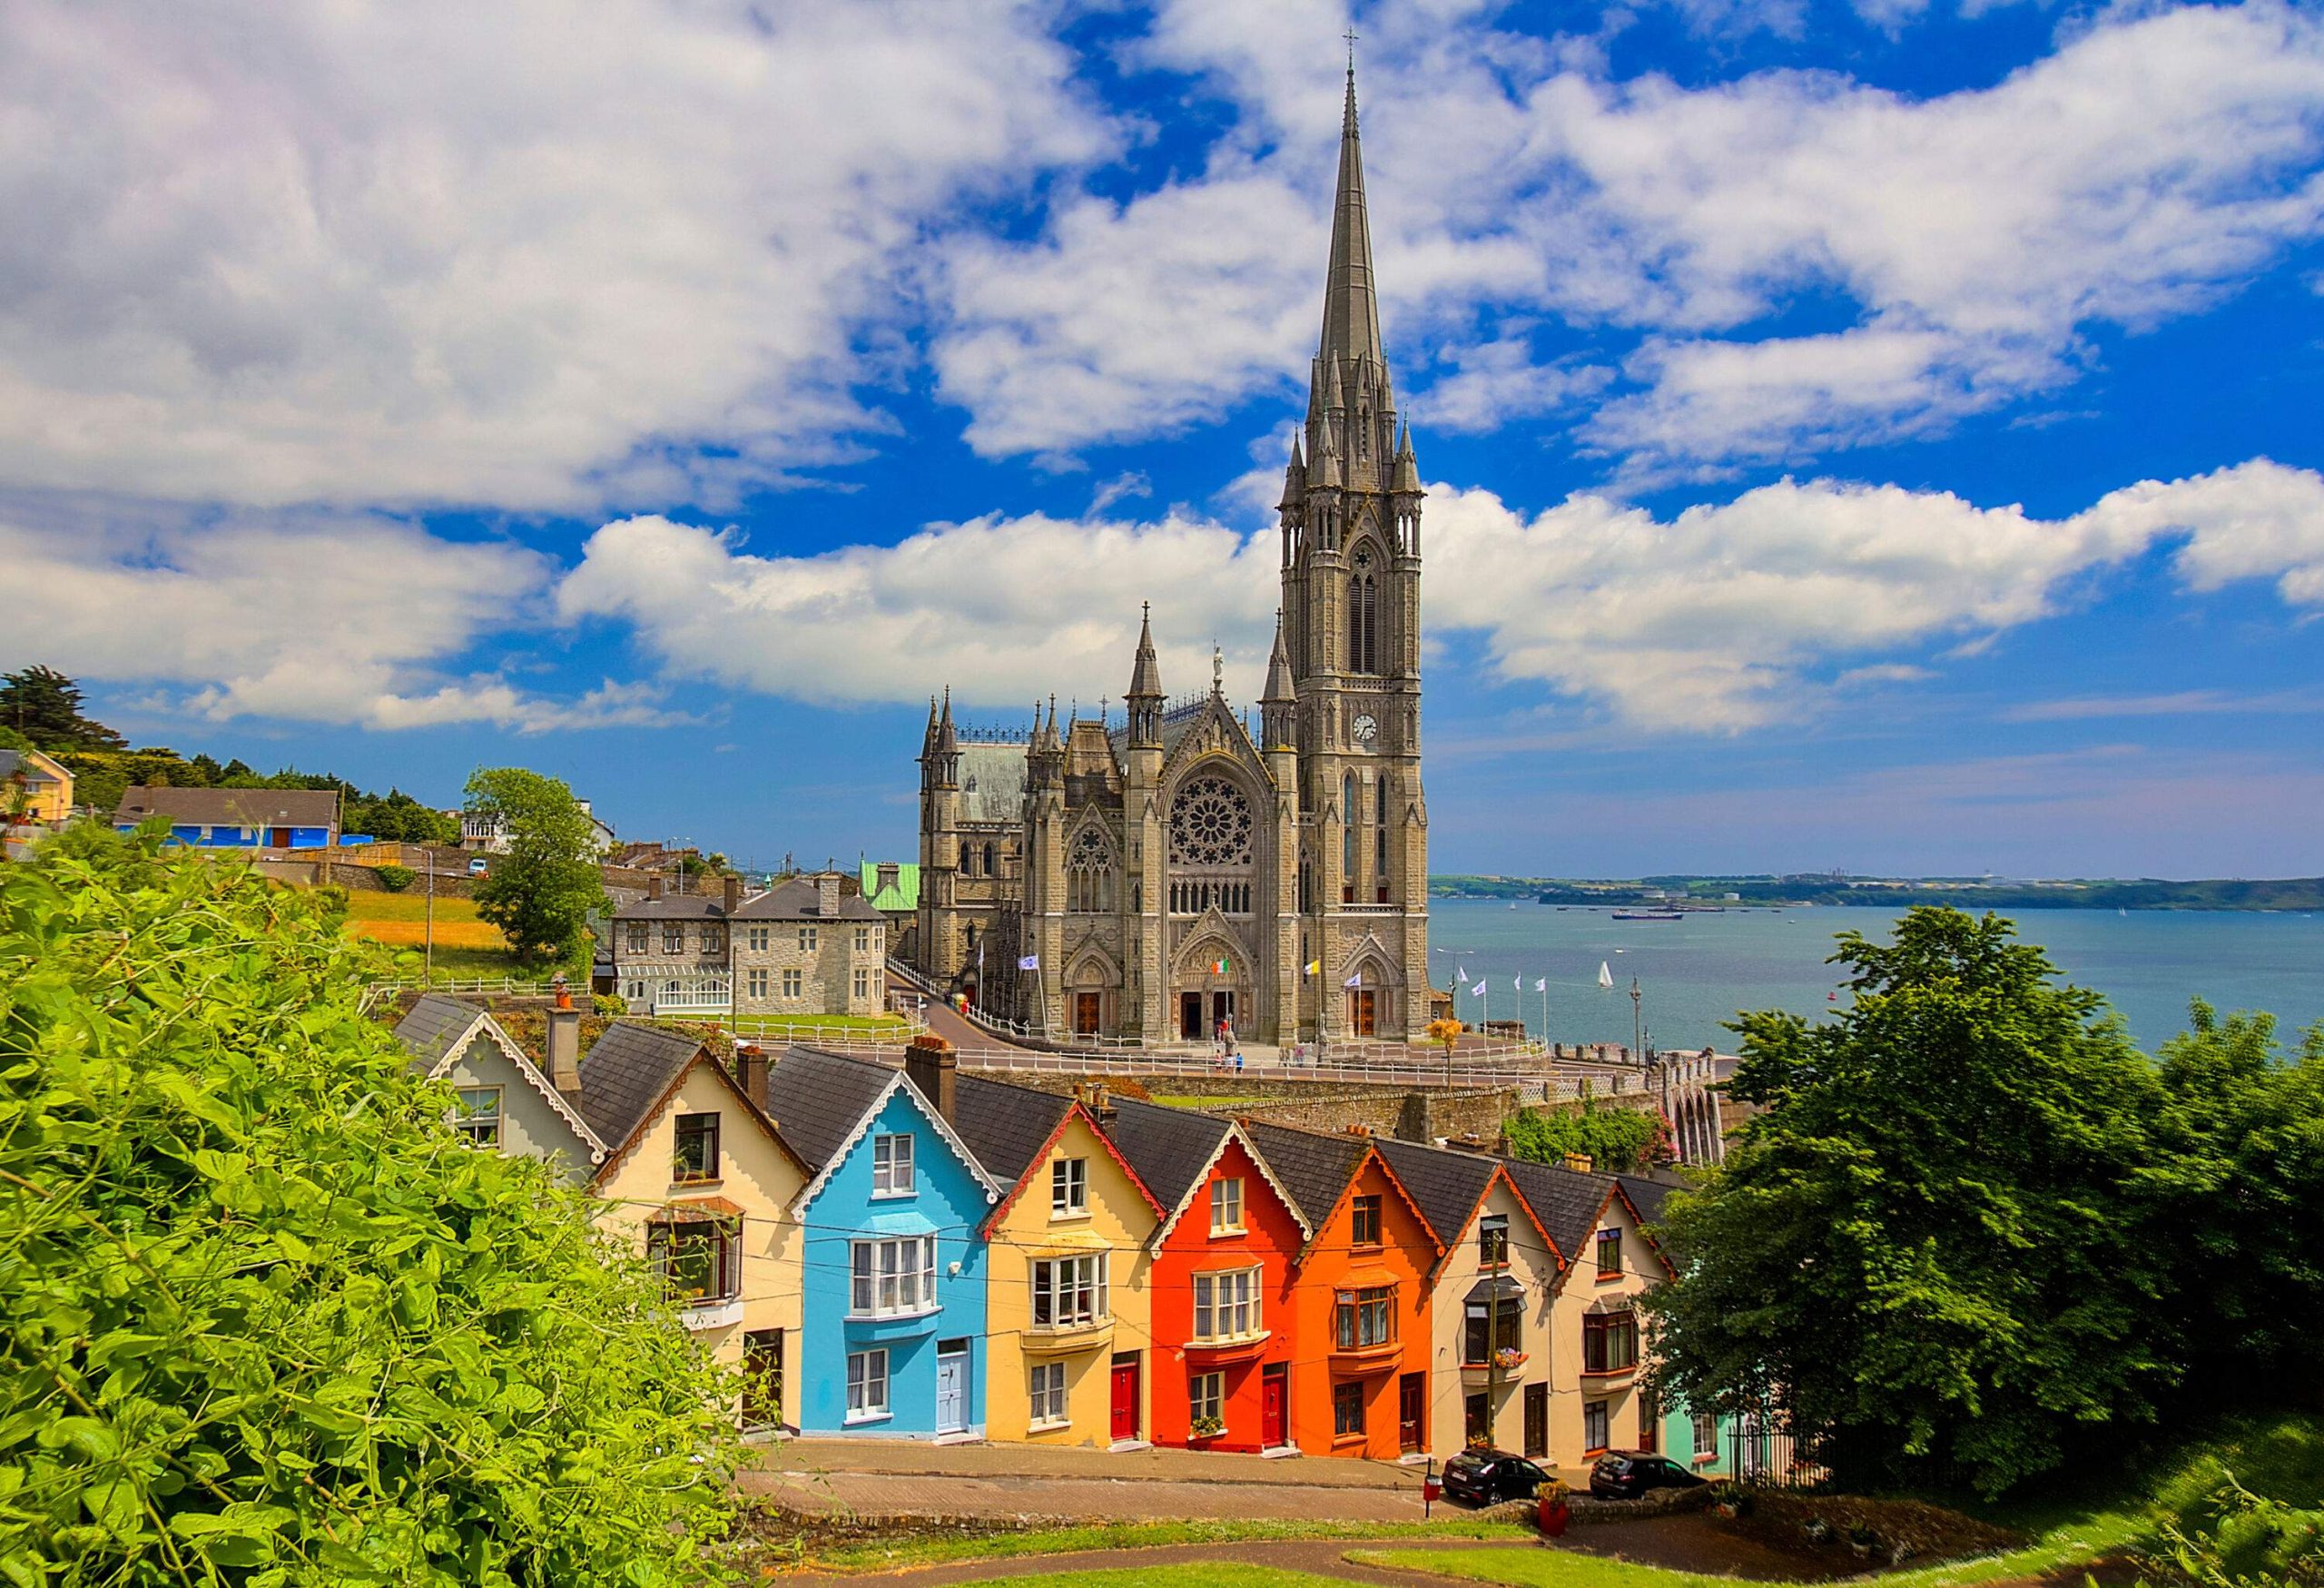 Behind a row of colourful houses layered on a hill is a single-spire cathedral that overlooks the town's natural harbour.